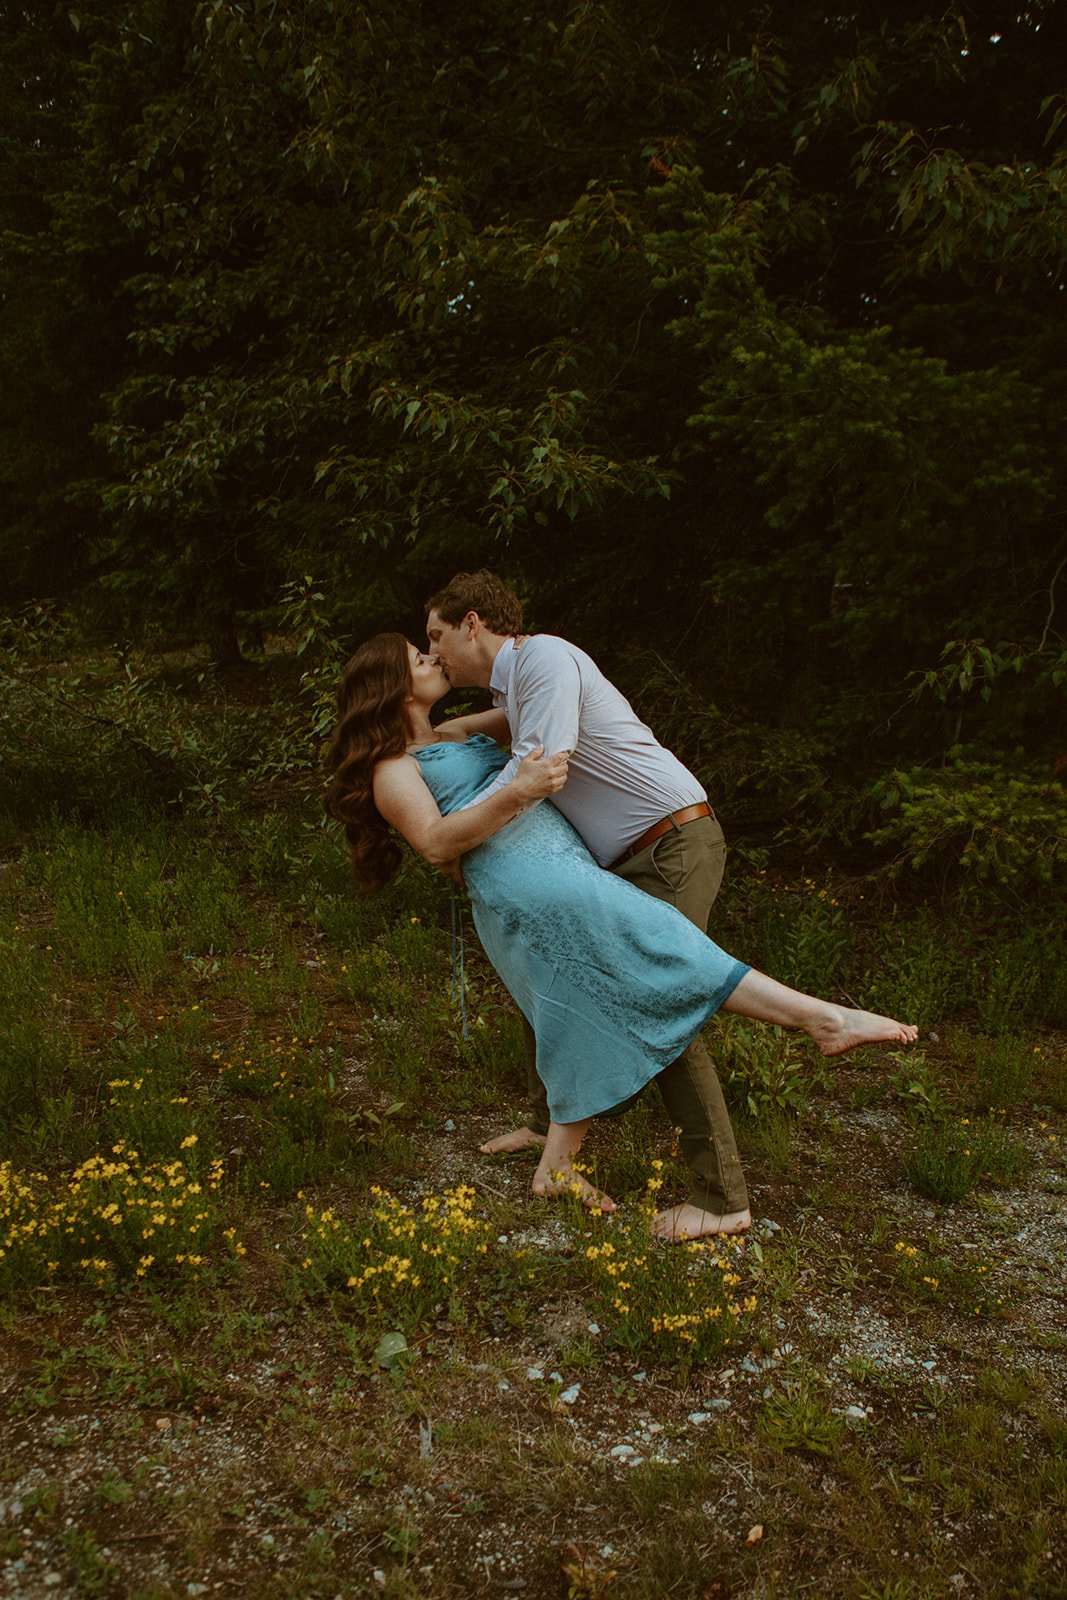 A Gold Creek Pond Outdoor Engagement Session - Shanean + Ian (20).jpg